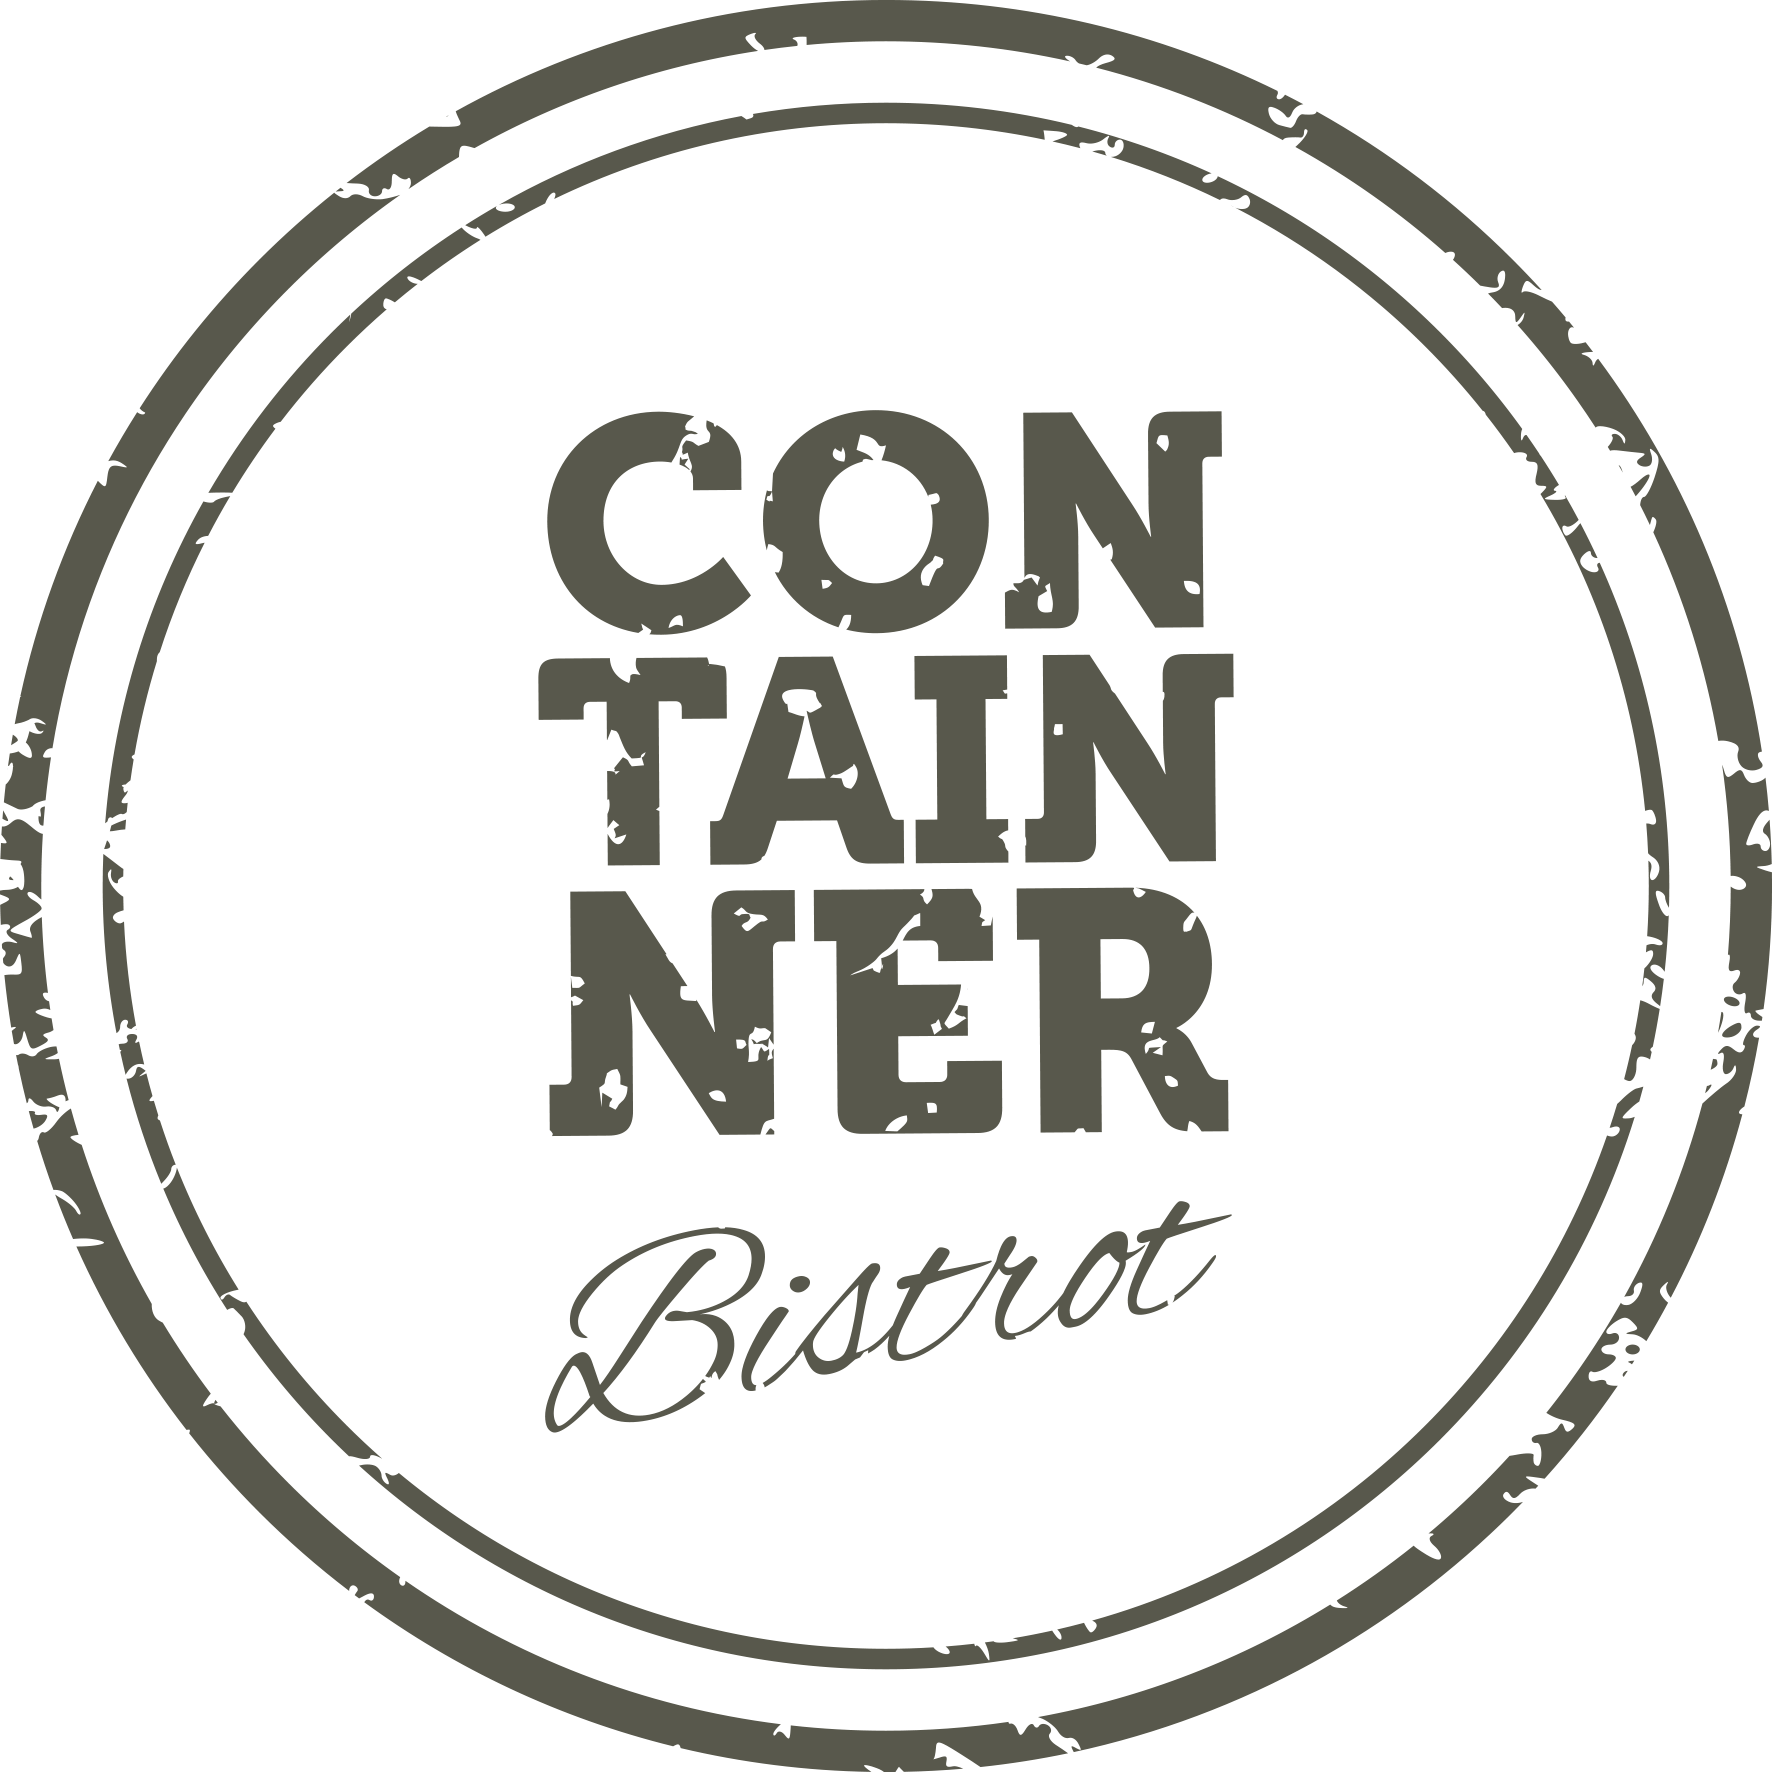 Logo Containner Bistrot